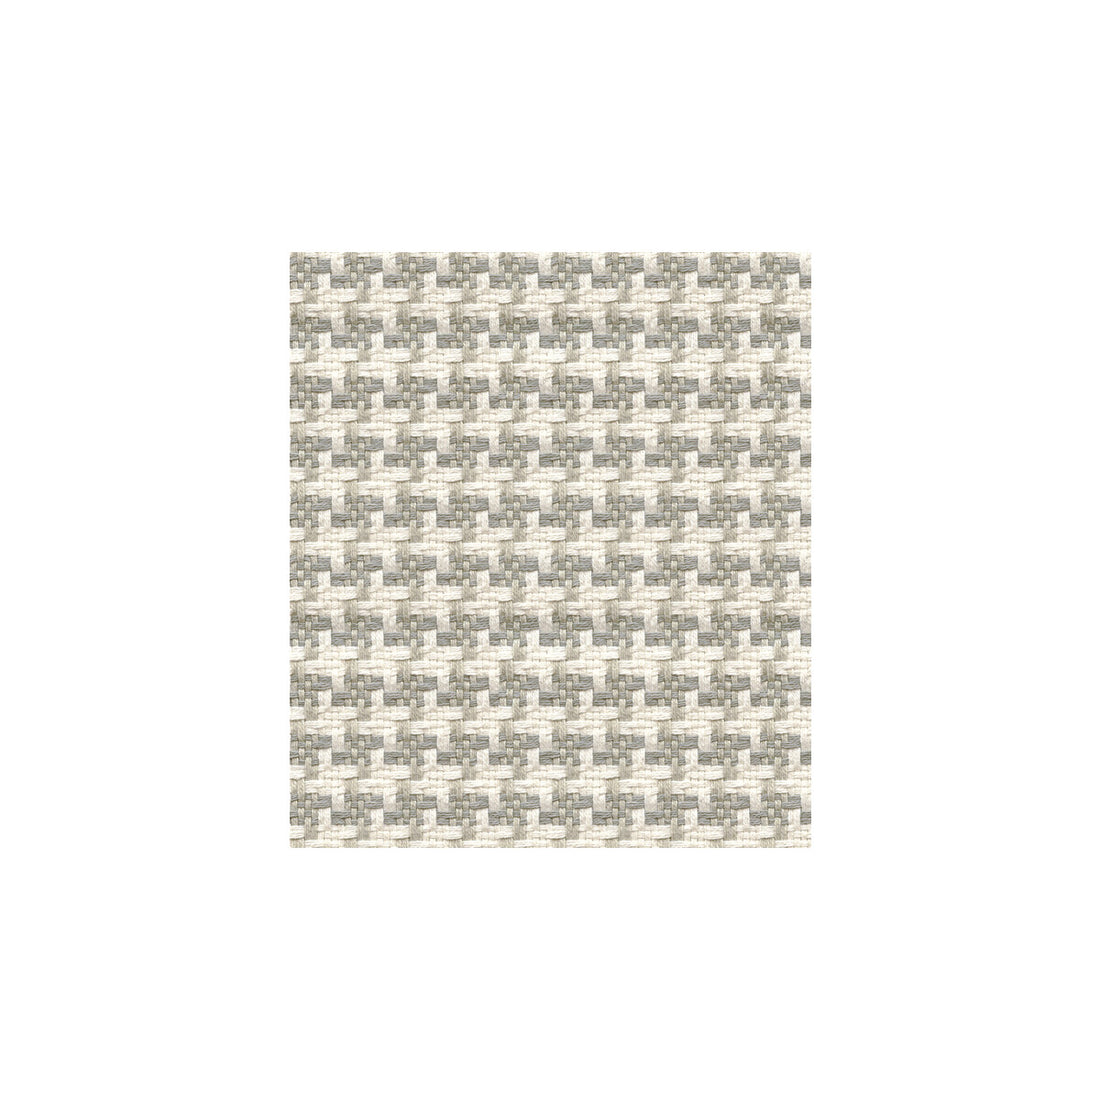 Huron fabric in linen color - pattern 32993.11.0 - by Kravet Basics in the Sarah Richardson Affinity collection